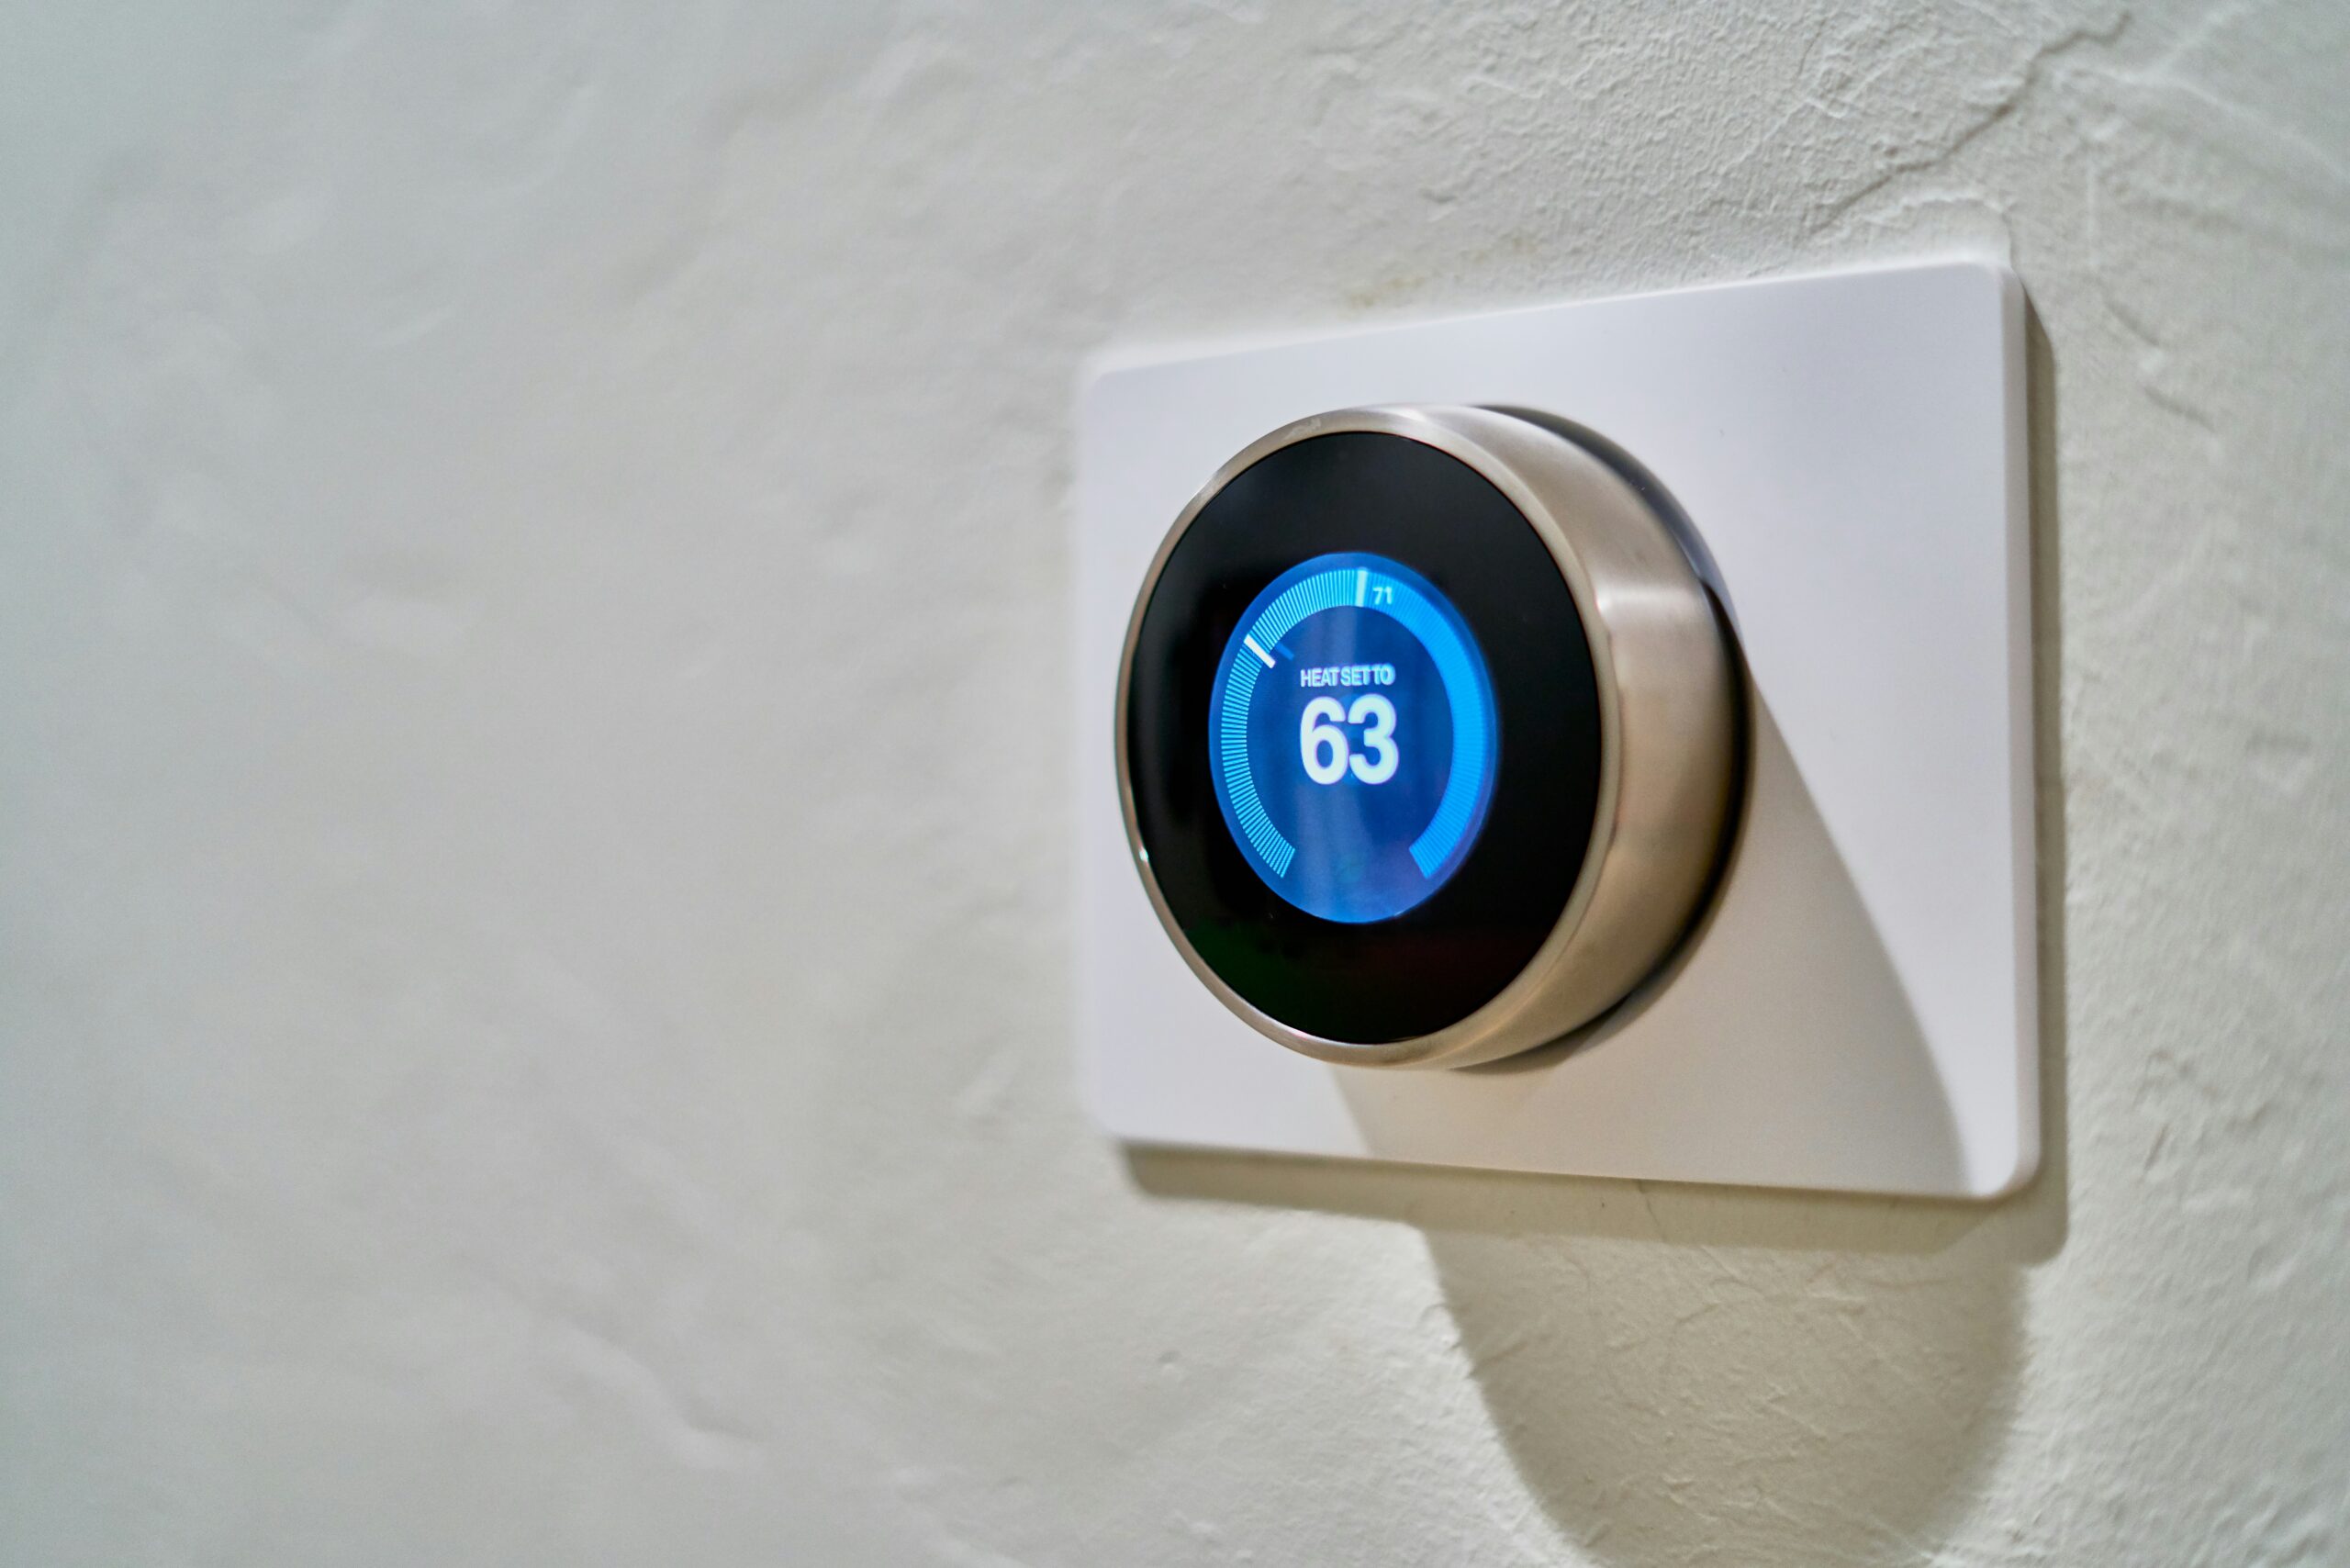 Air conditioning & Heating, EFA displaying a gray Nest thermostat displaying at 63